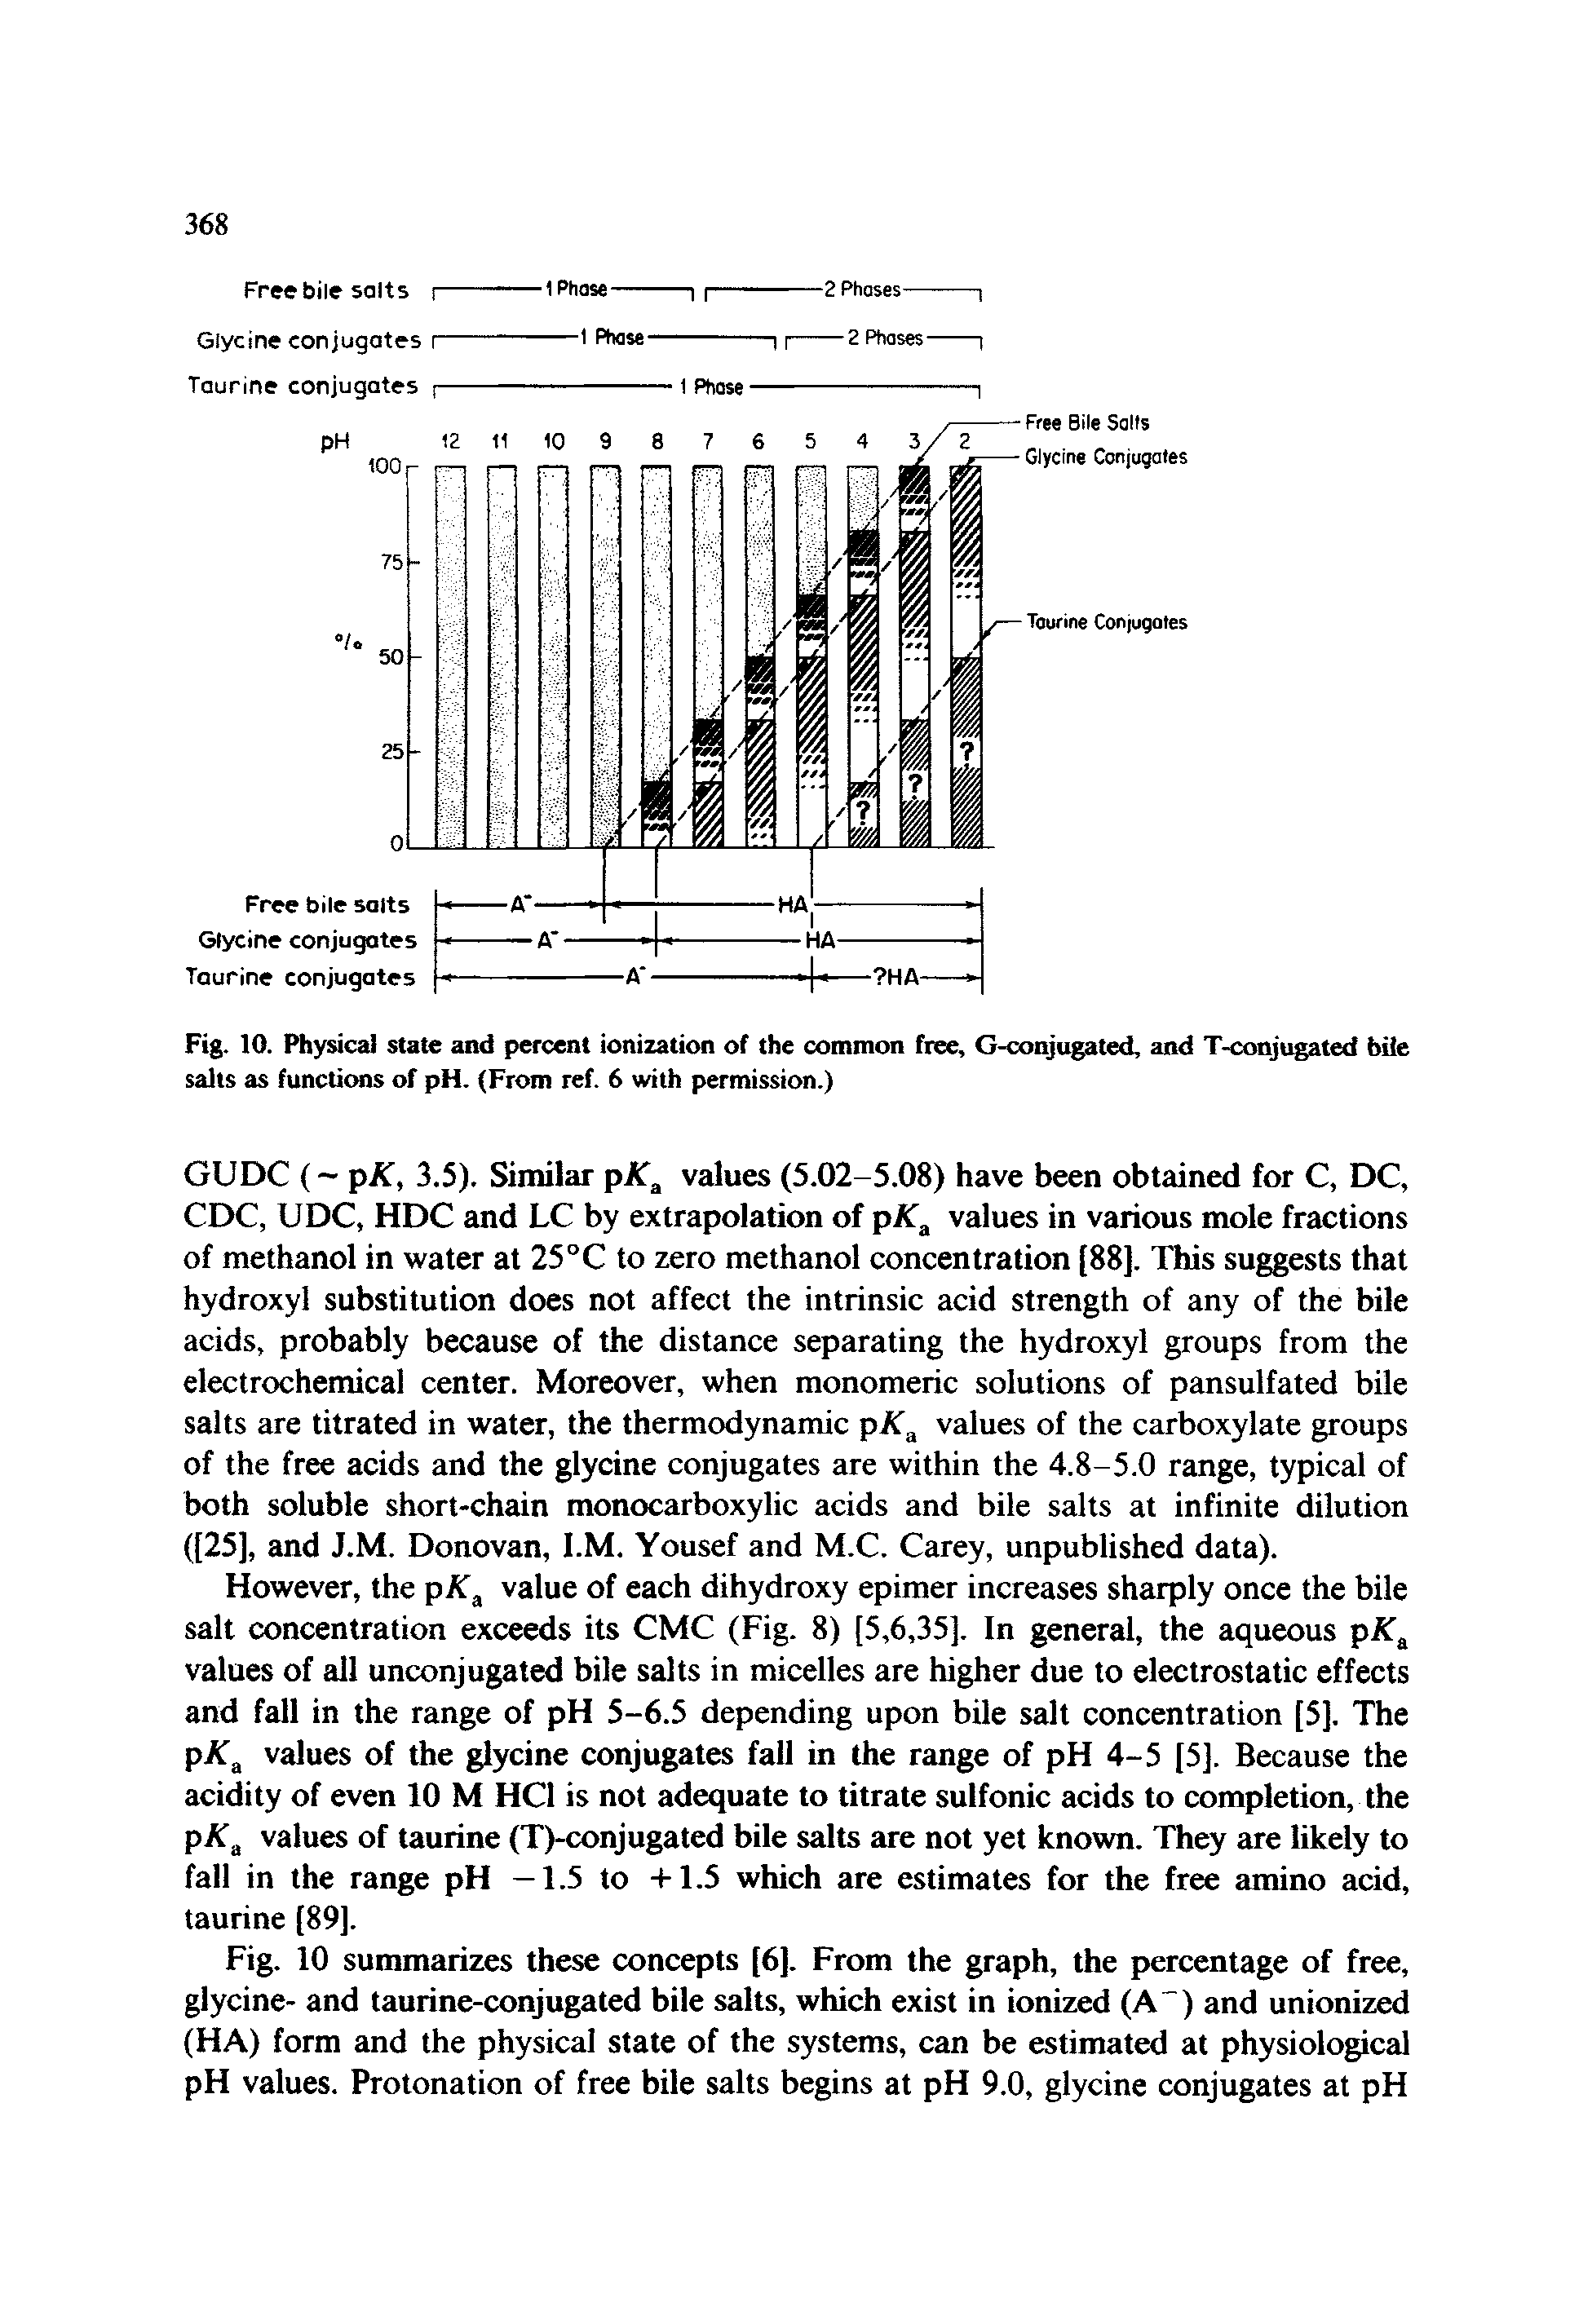 Fig. 10. Physical state and percent ionization of the common free, G-conjugated, and T-conjugated bile salts as functions of pH. (From ref. 6 with permission.)...